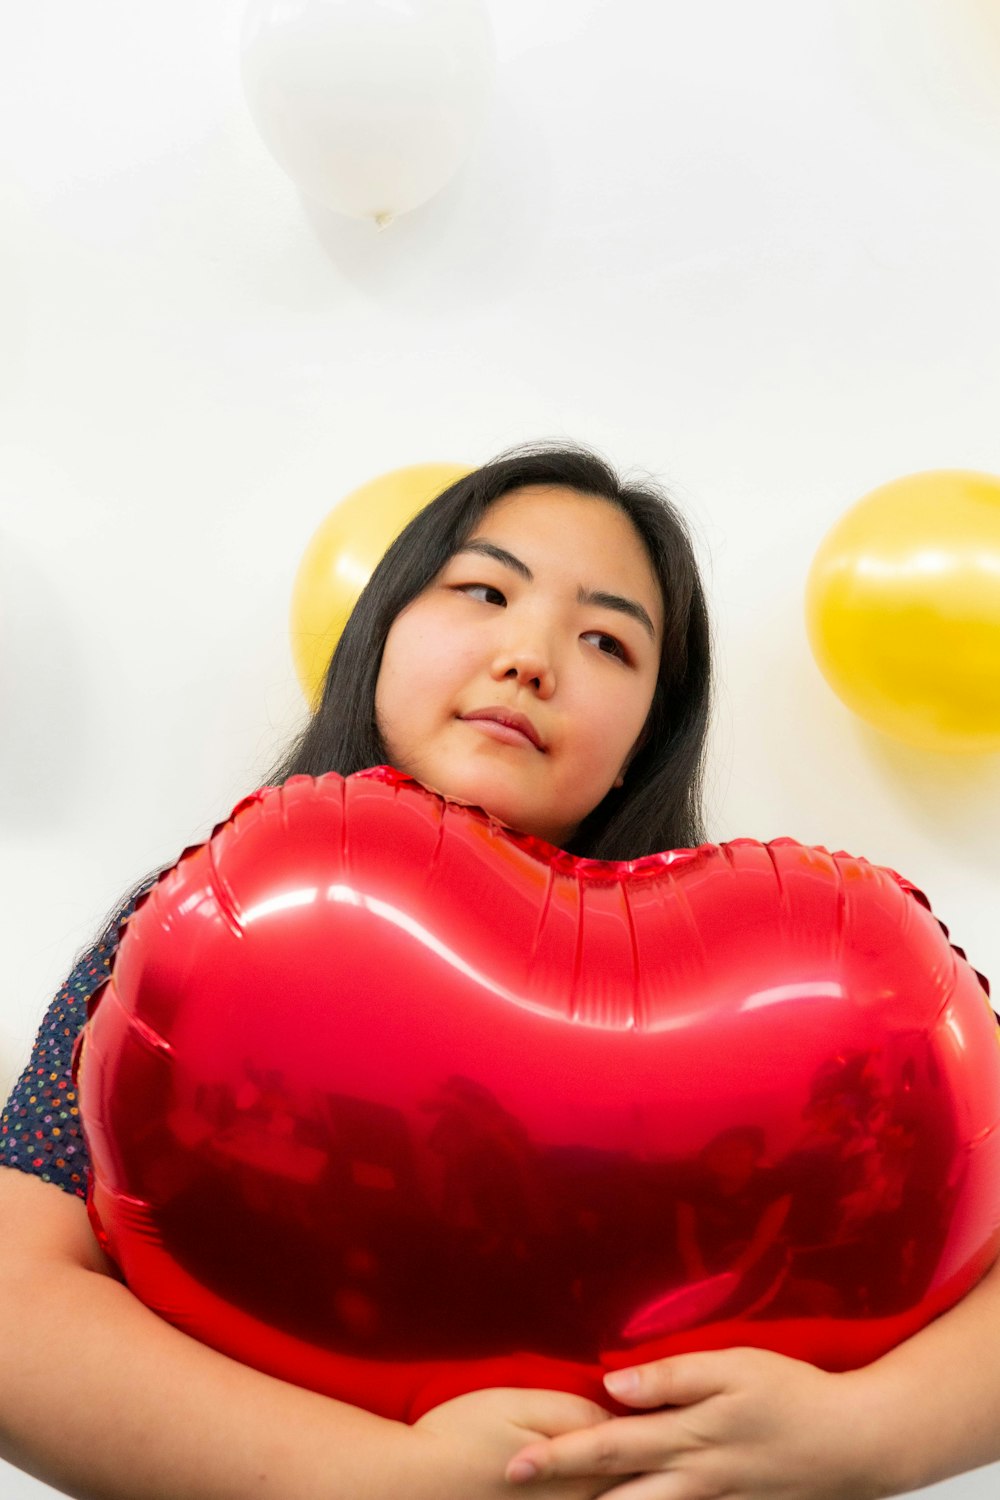 girl in red and white shirt holding heart balloon